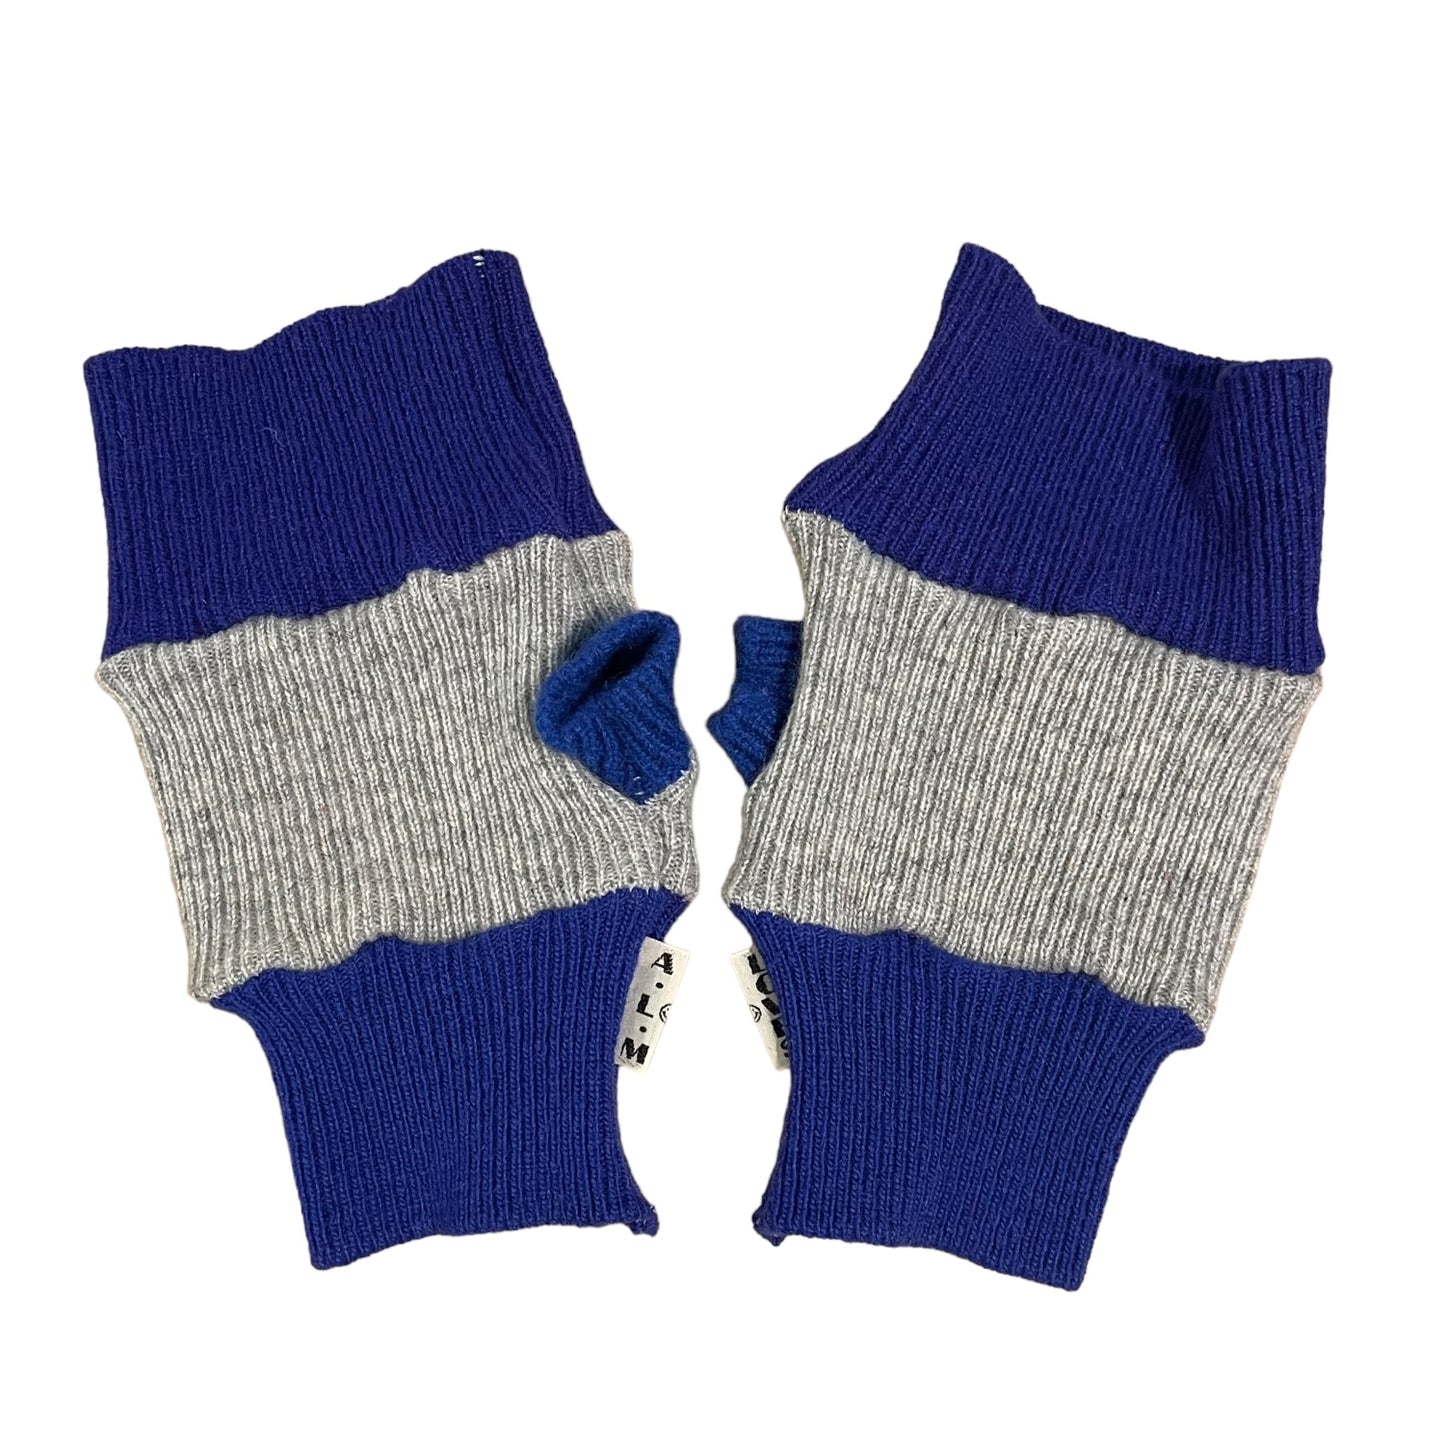 Recycled Cashmere Hand Warmer Gloves #8